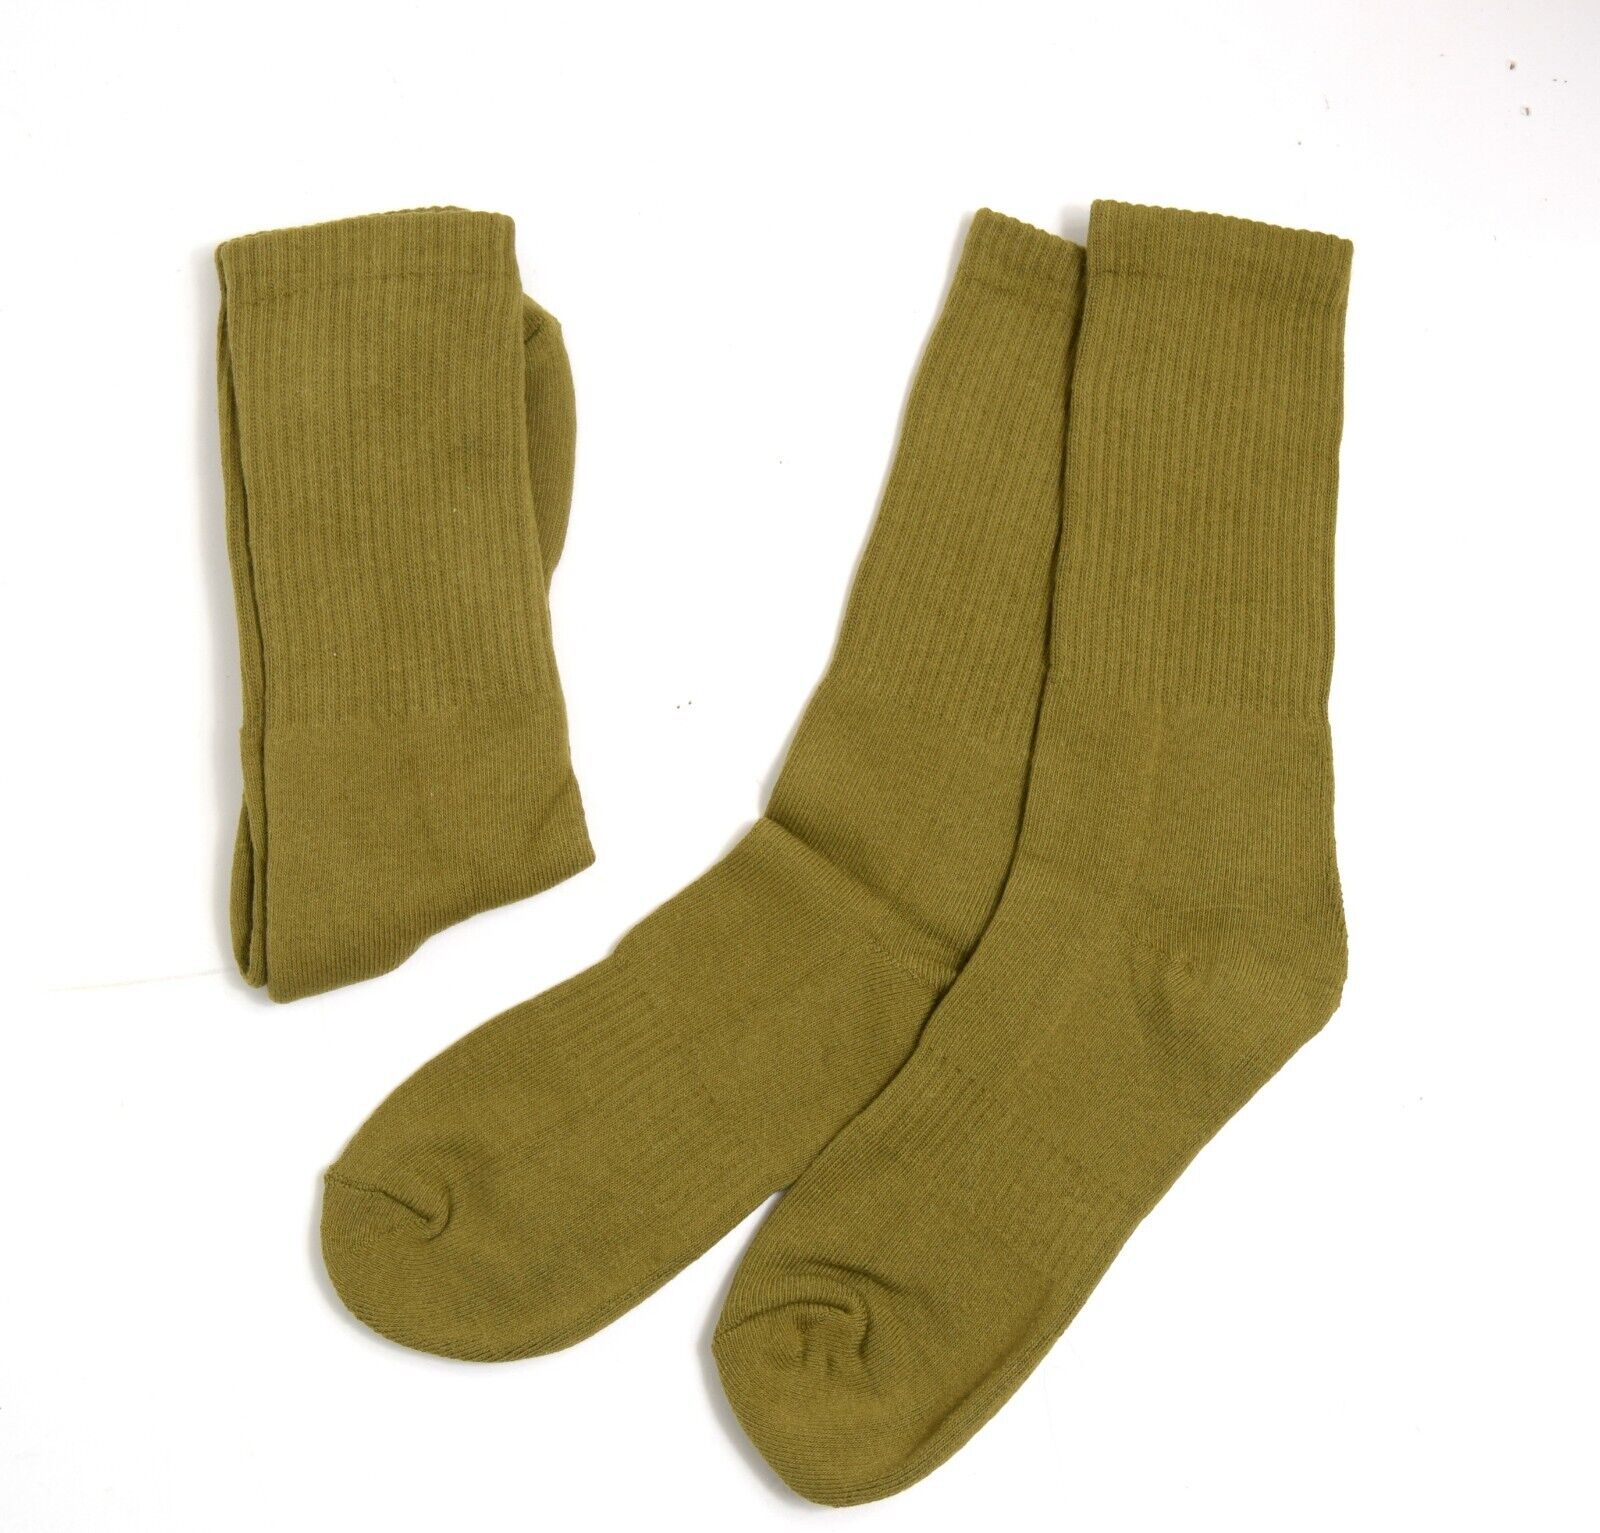 5 x Pairs US Army Khaki Mustard Socks NEW OLD STOCK OD Olive General Issue NEW